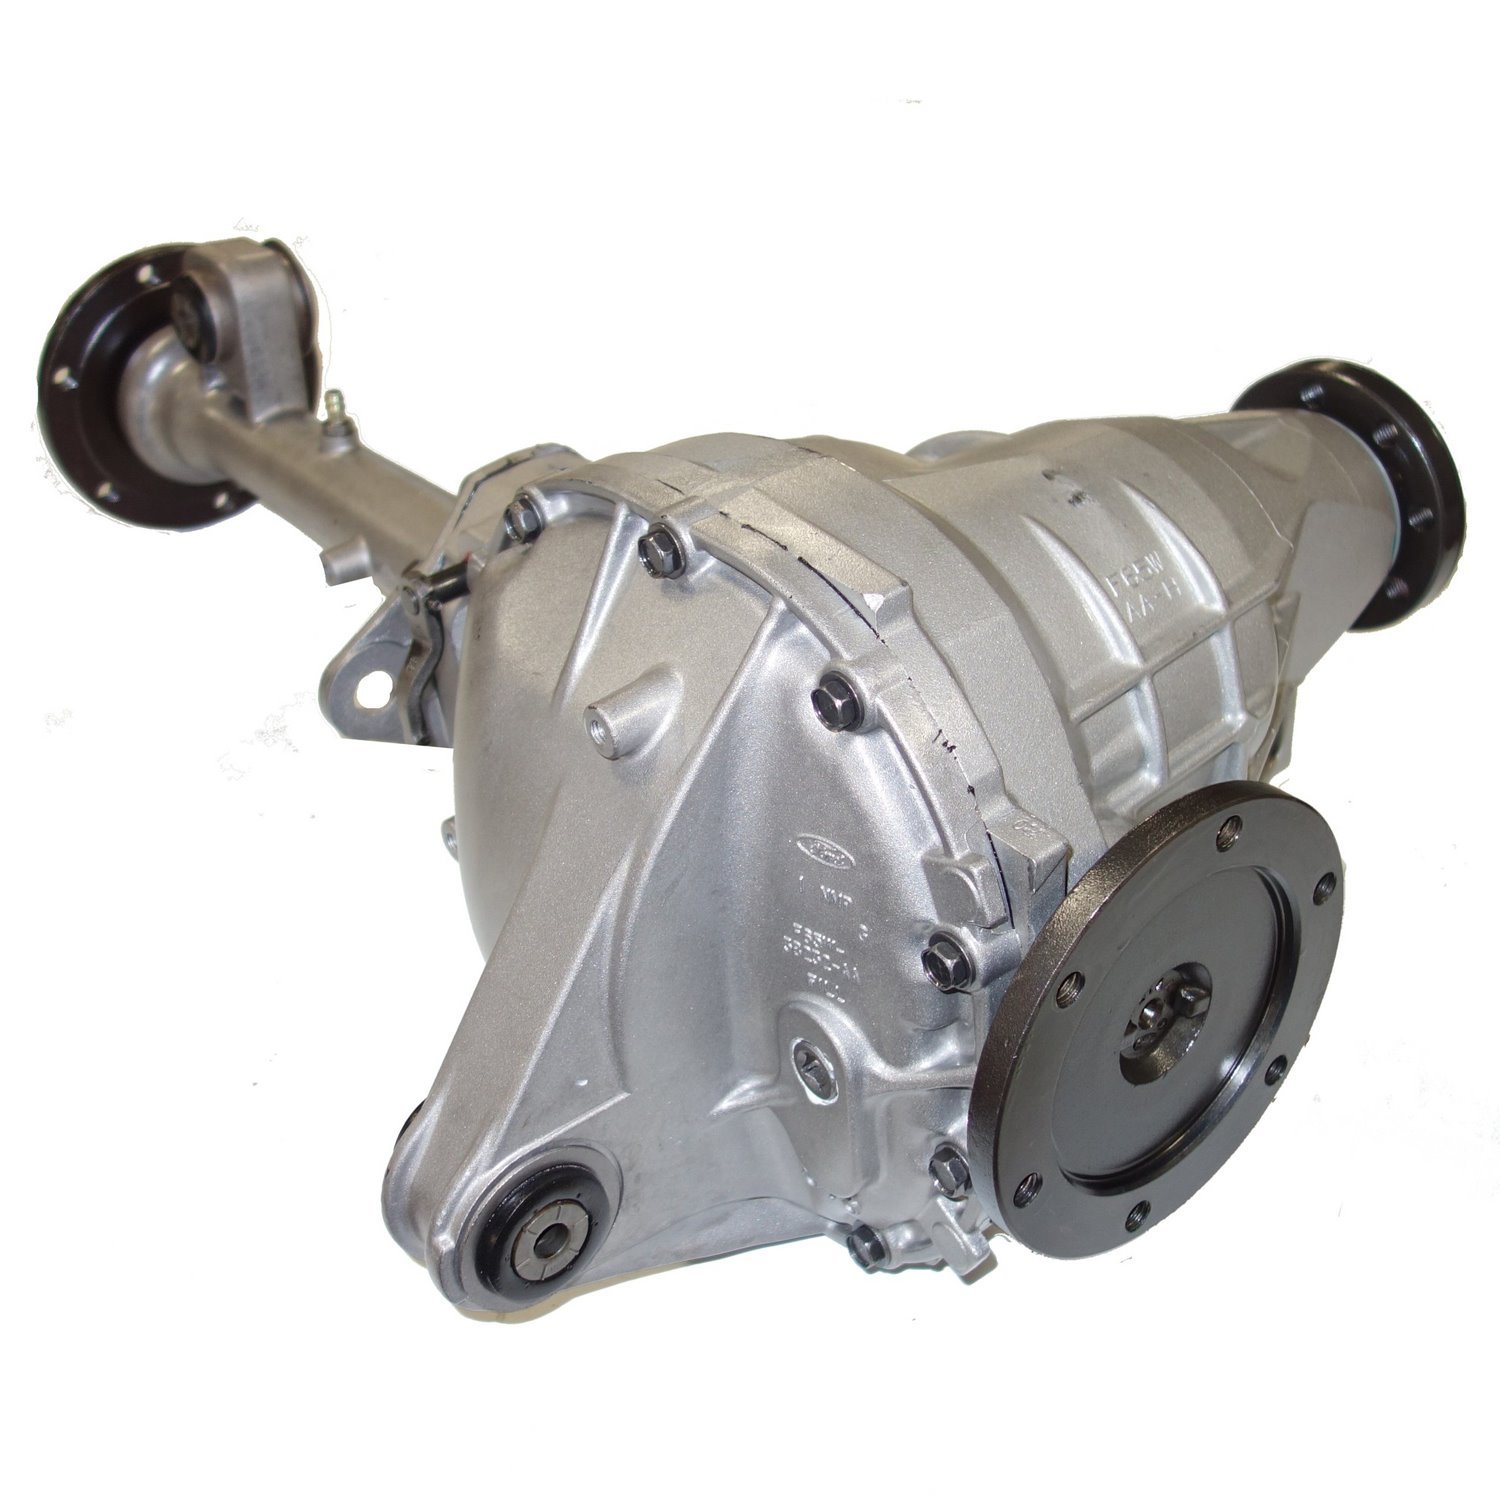 Remanufactured Axle Assembly for Ford 8.8 IFS 97-04 Ford F150 3.55 Ratio